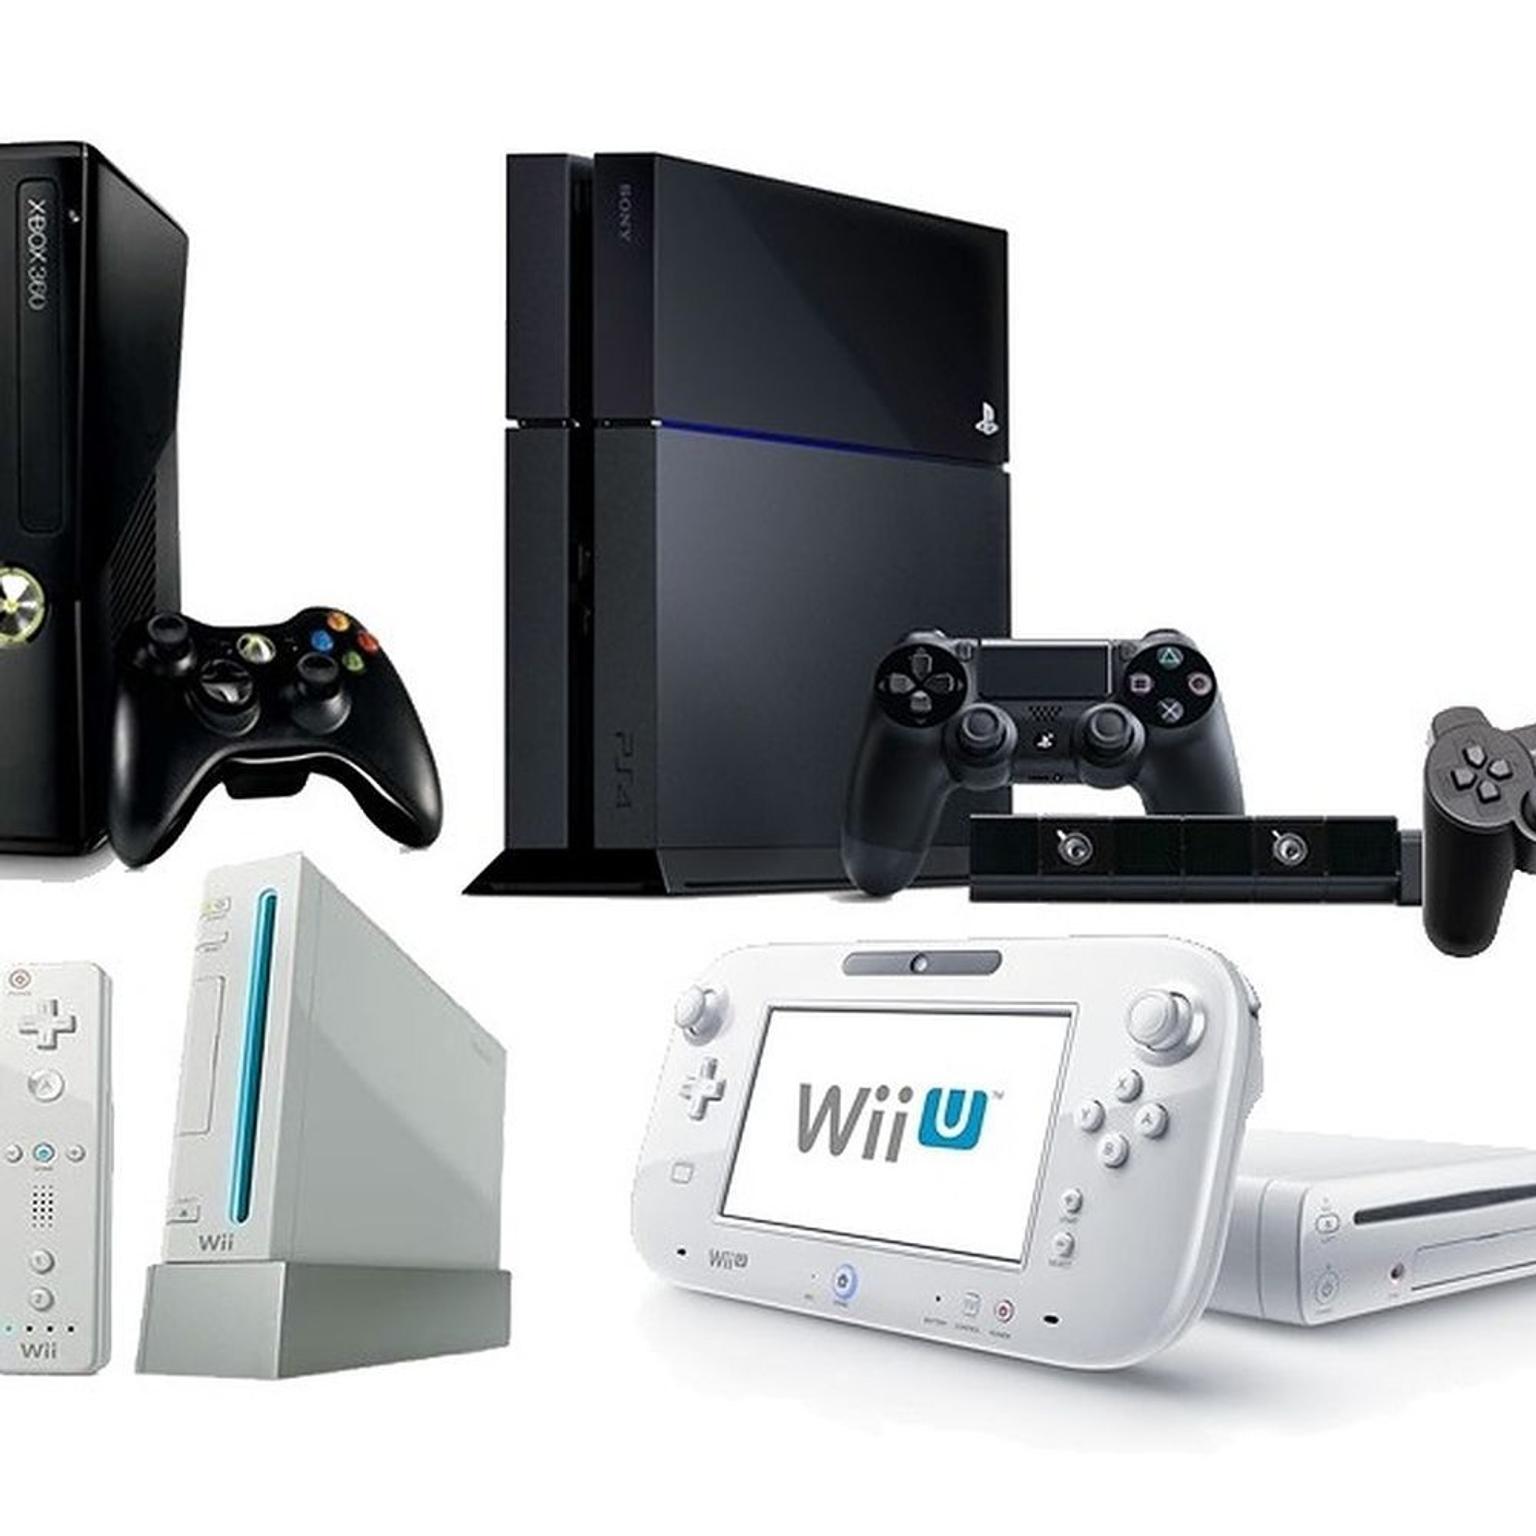 cheap playstation consoles